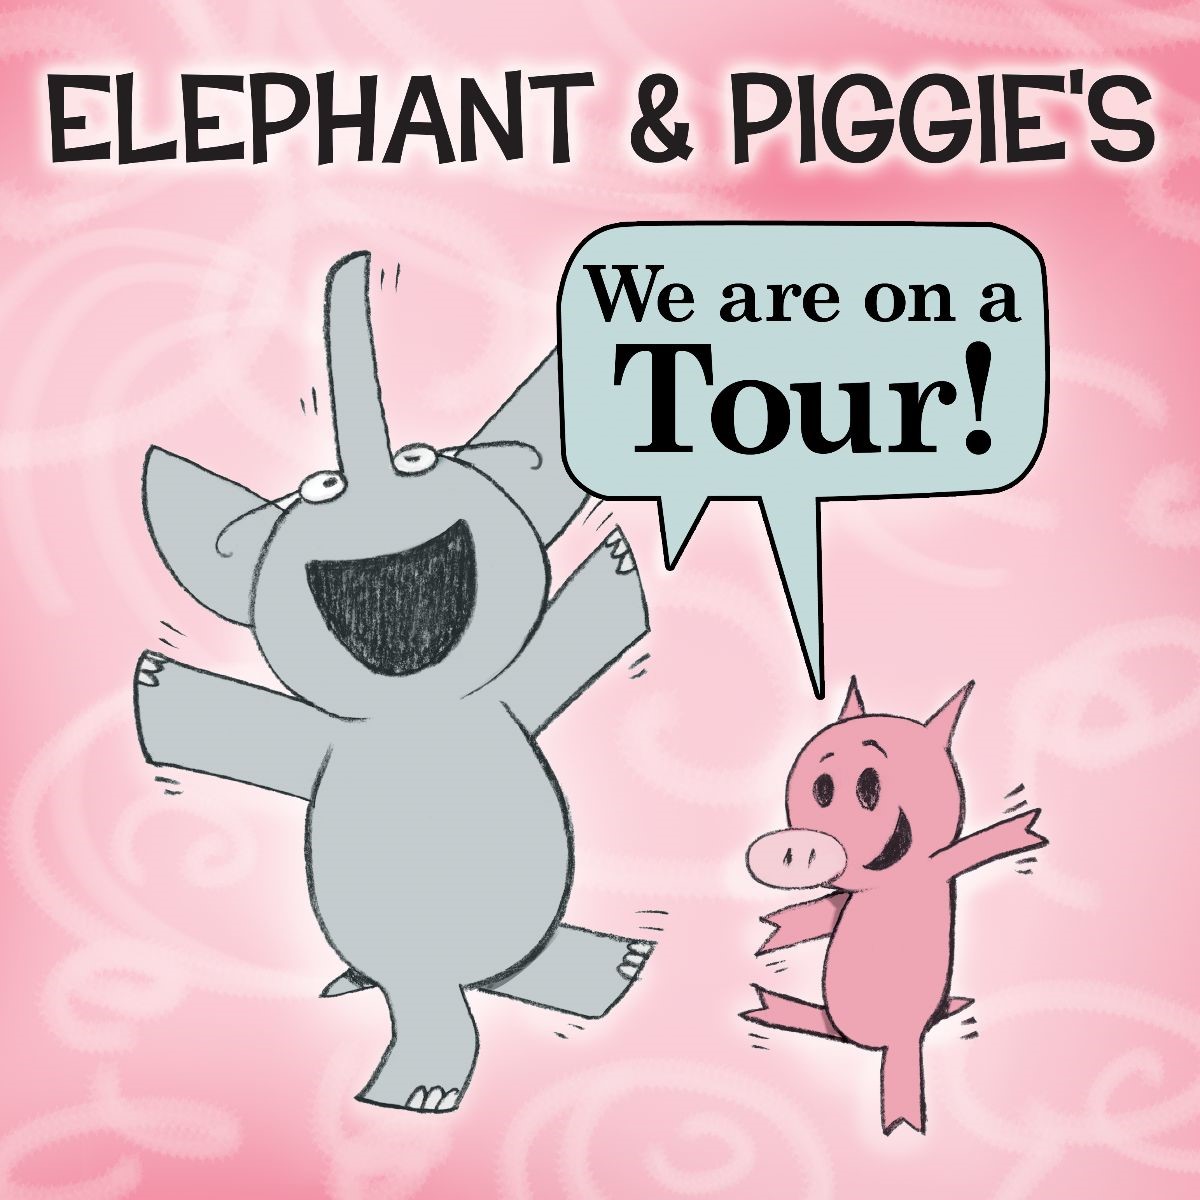 nwct-presents-elephant-piggie-s-we-are-in-a-play-tour-sherwood